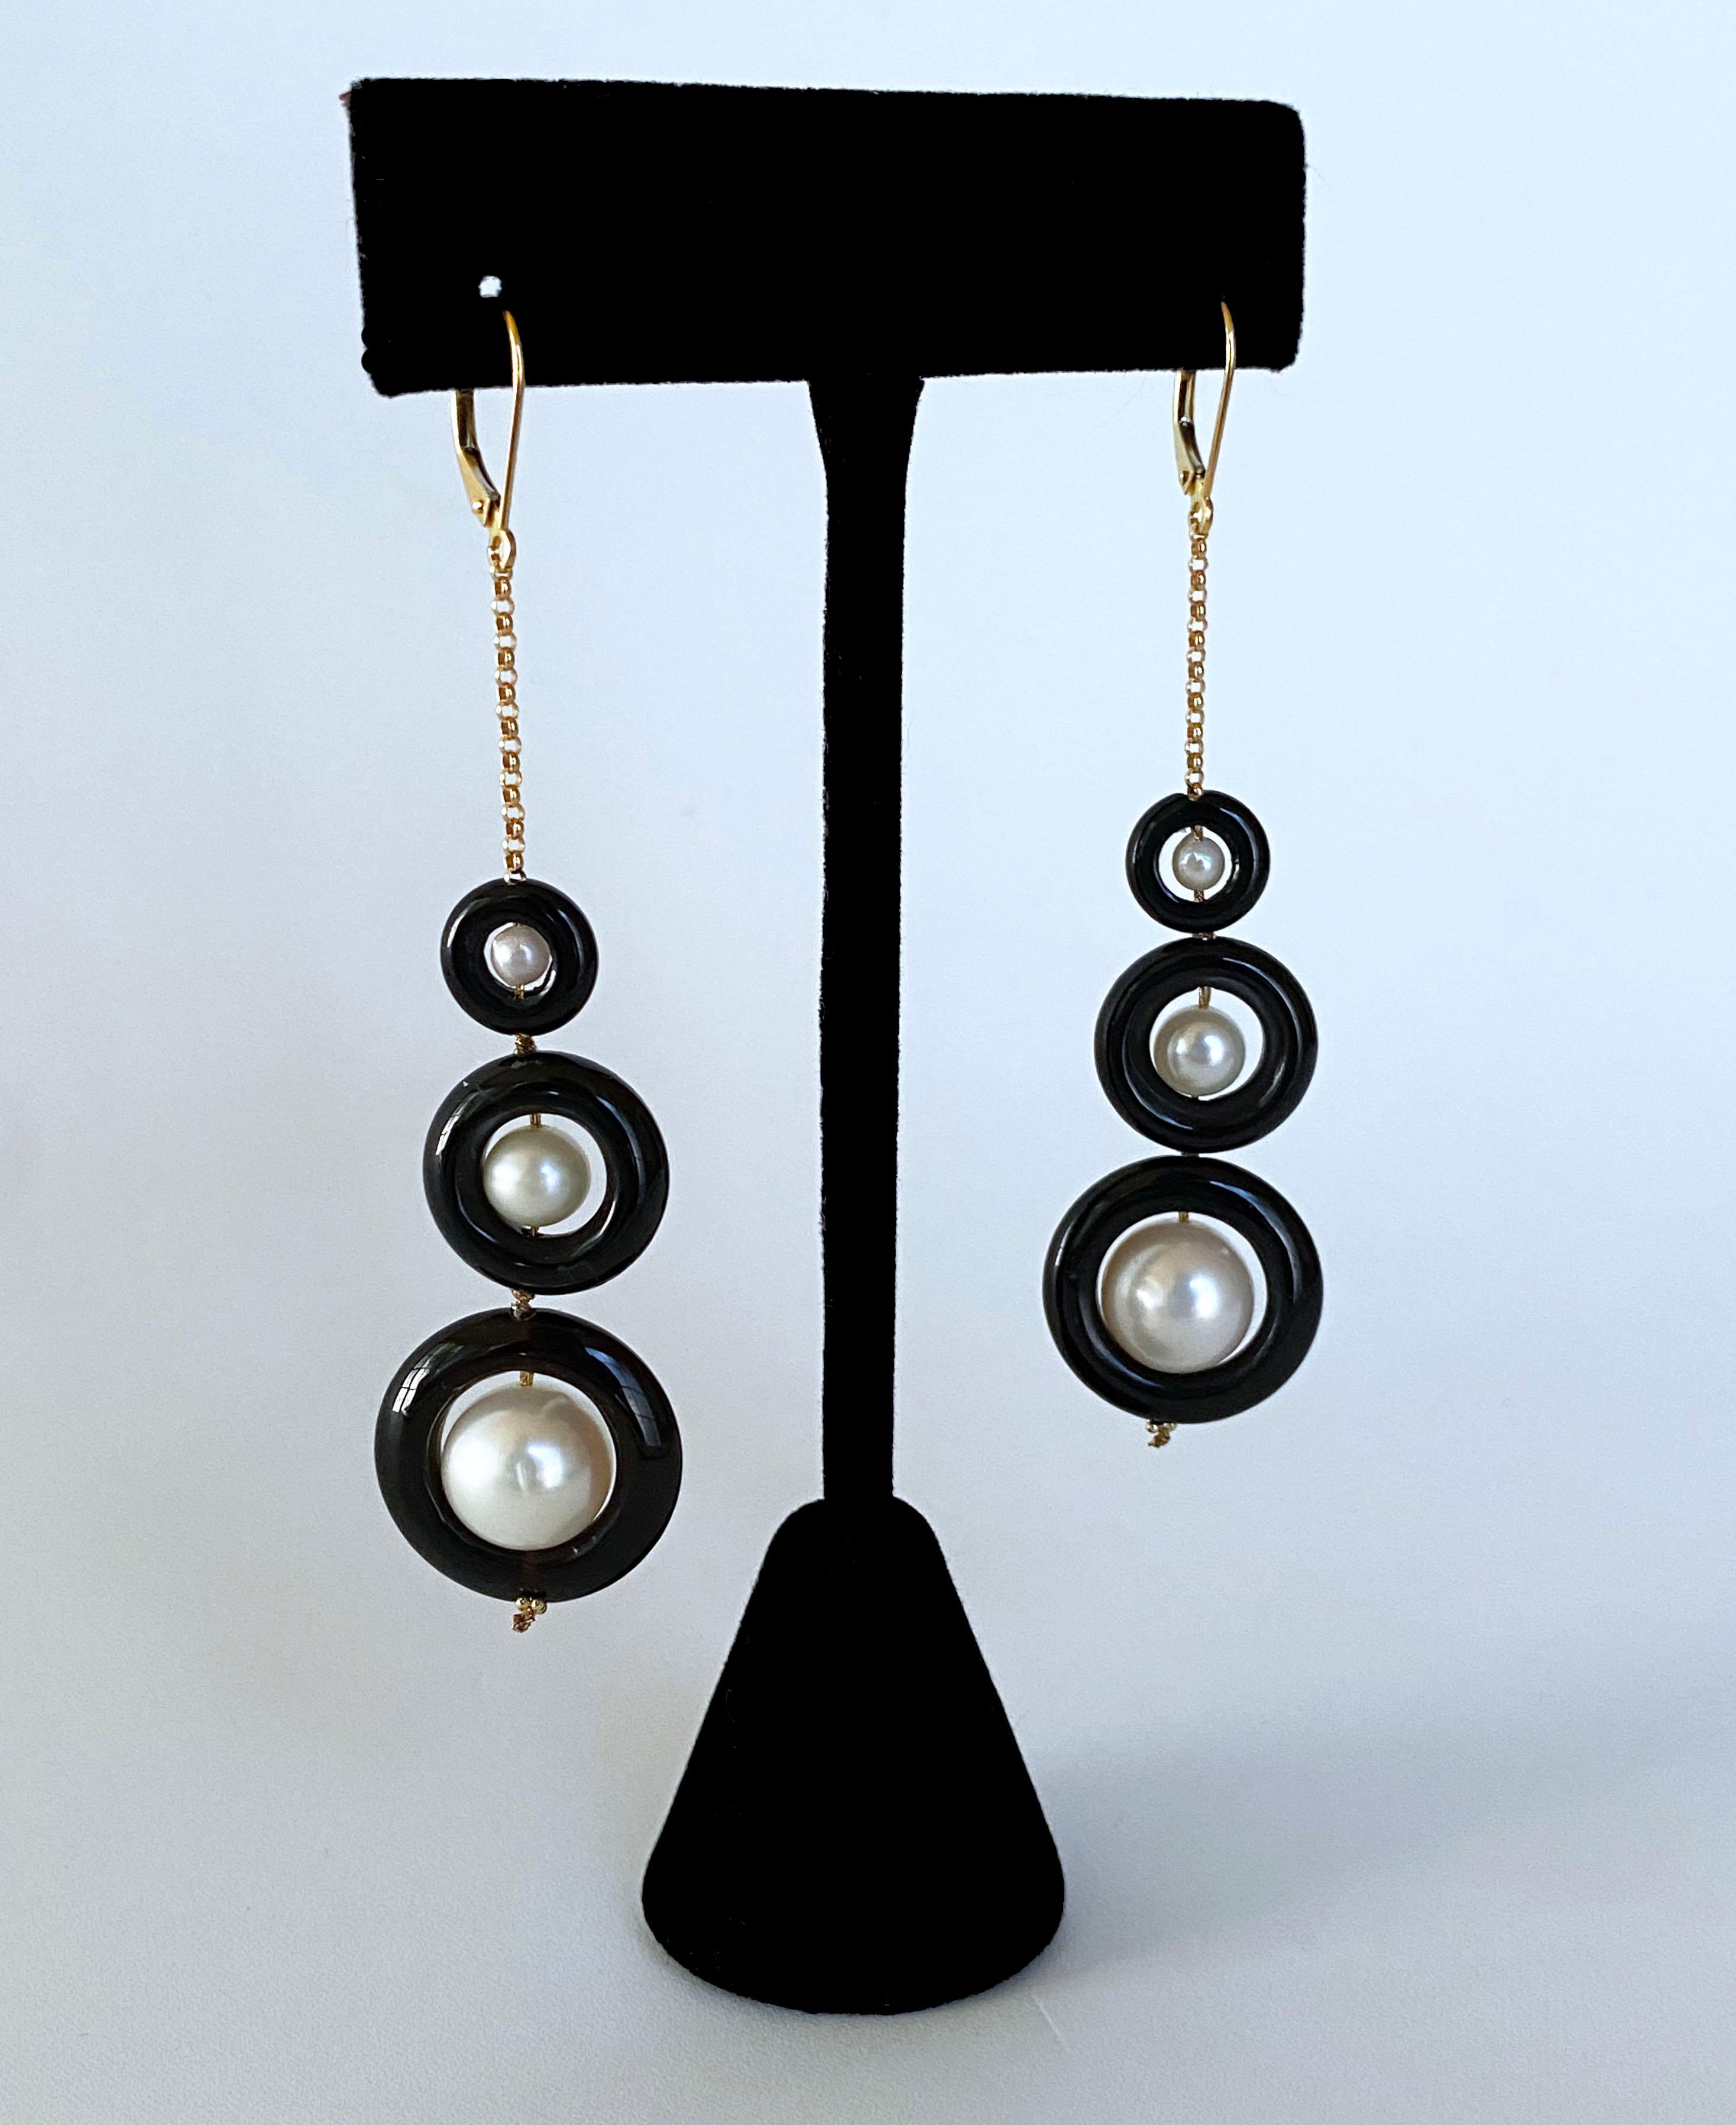 Stunning pair of Earrings by Marina J. This pair feature round white Pearls with a soft iridescent sheen, all sitting inside round Black Onyx donuts. The Pearls and Black Onyx Graduate in size making a 3 tier Hanging Earring. Both pieces in this set